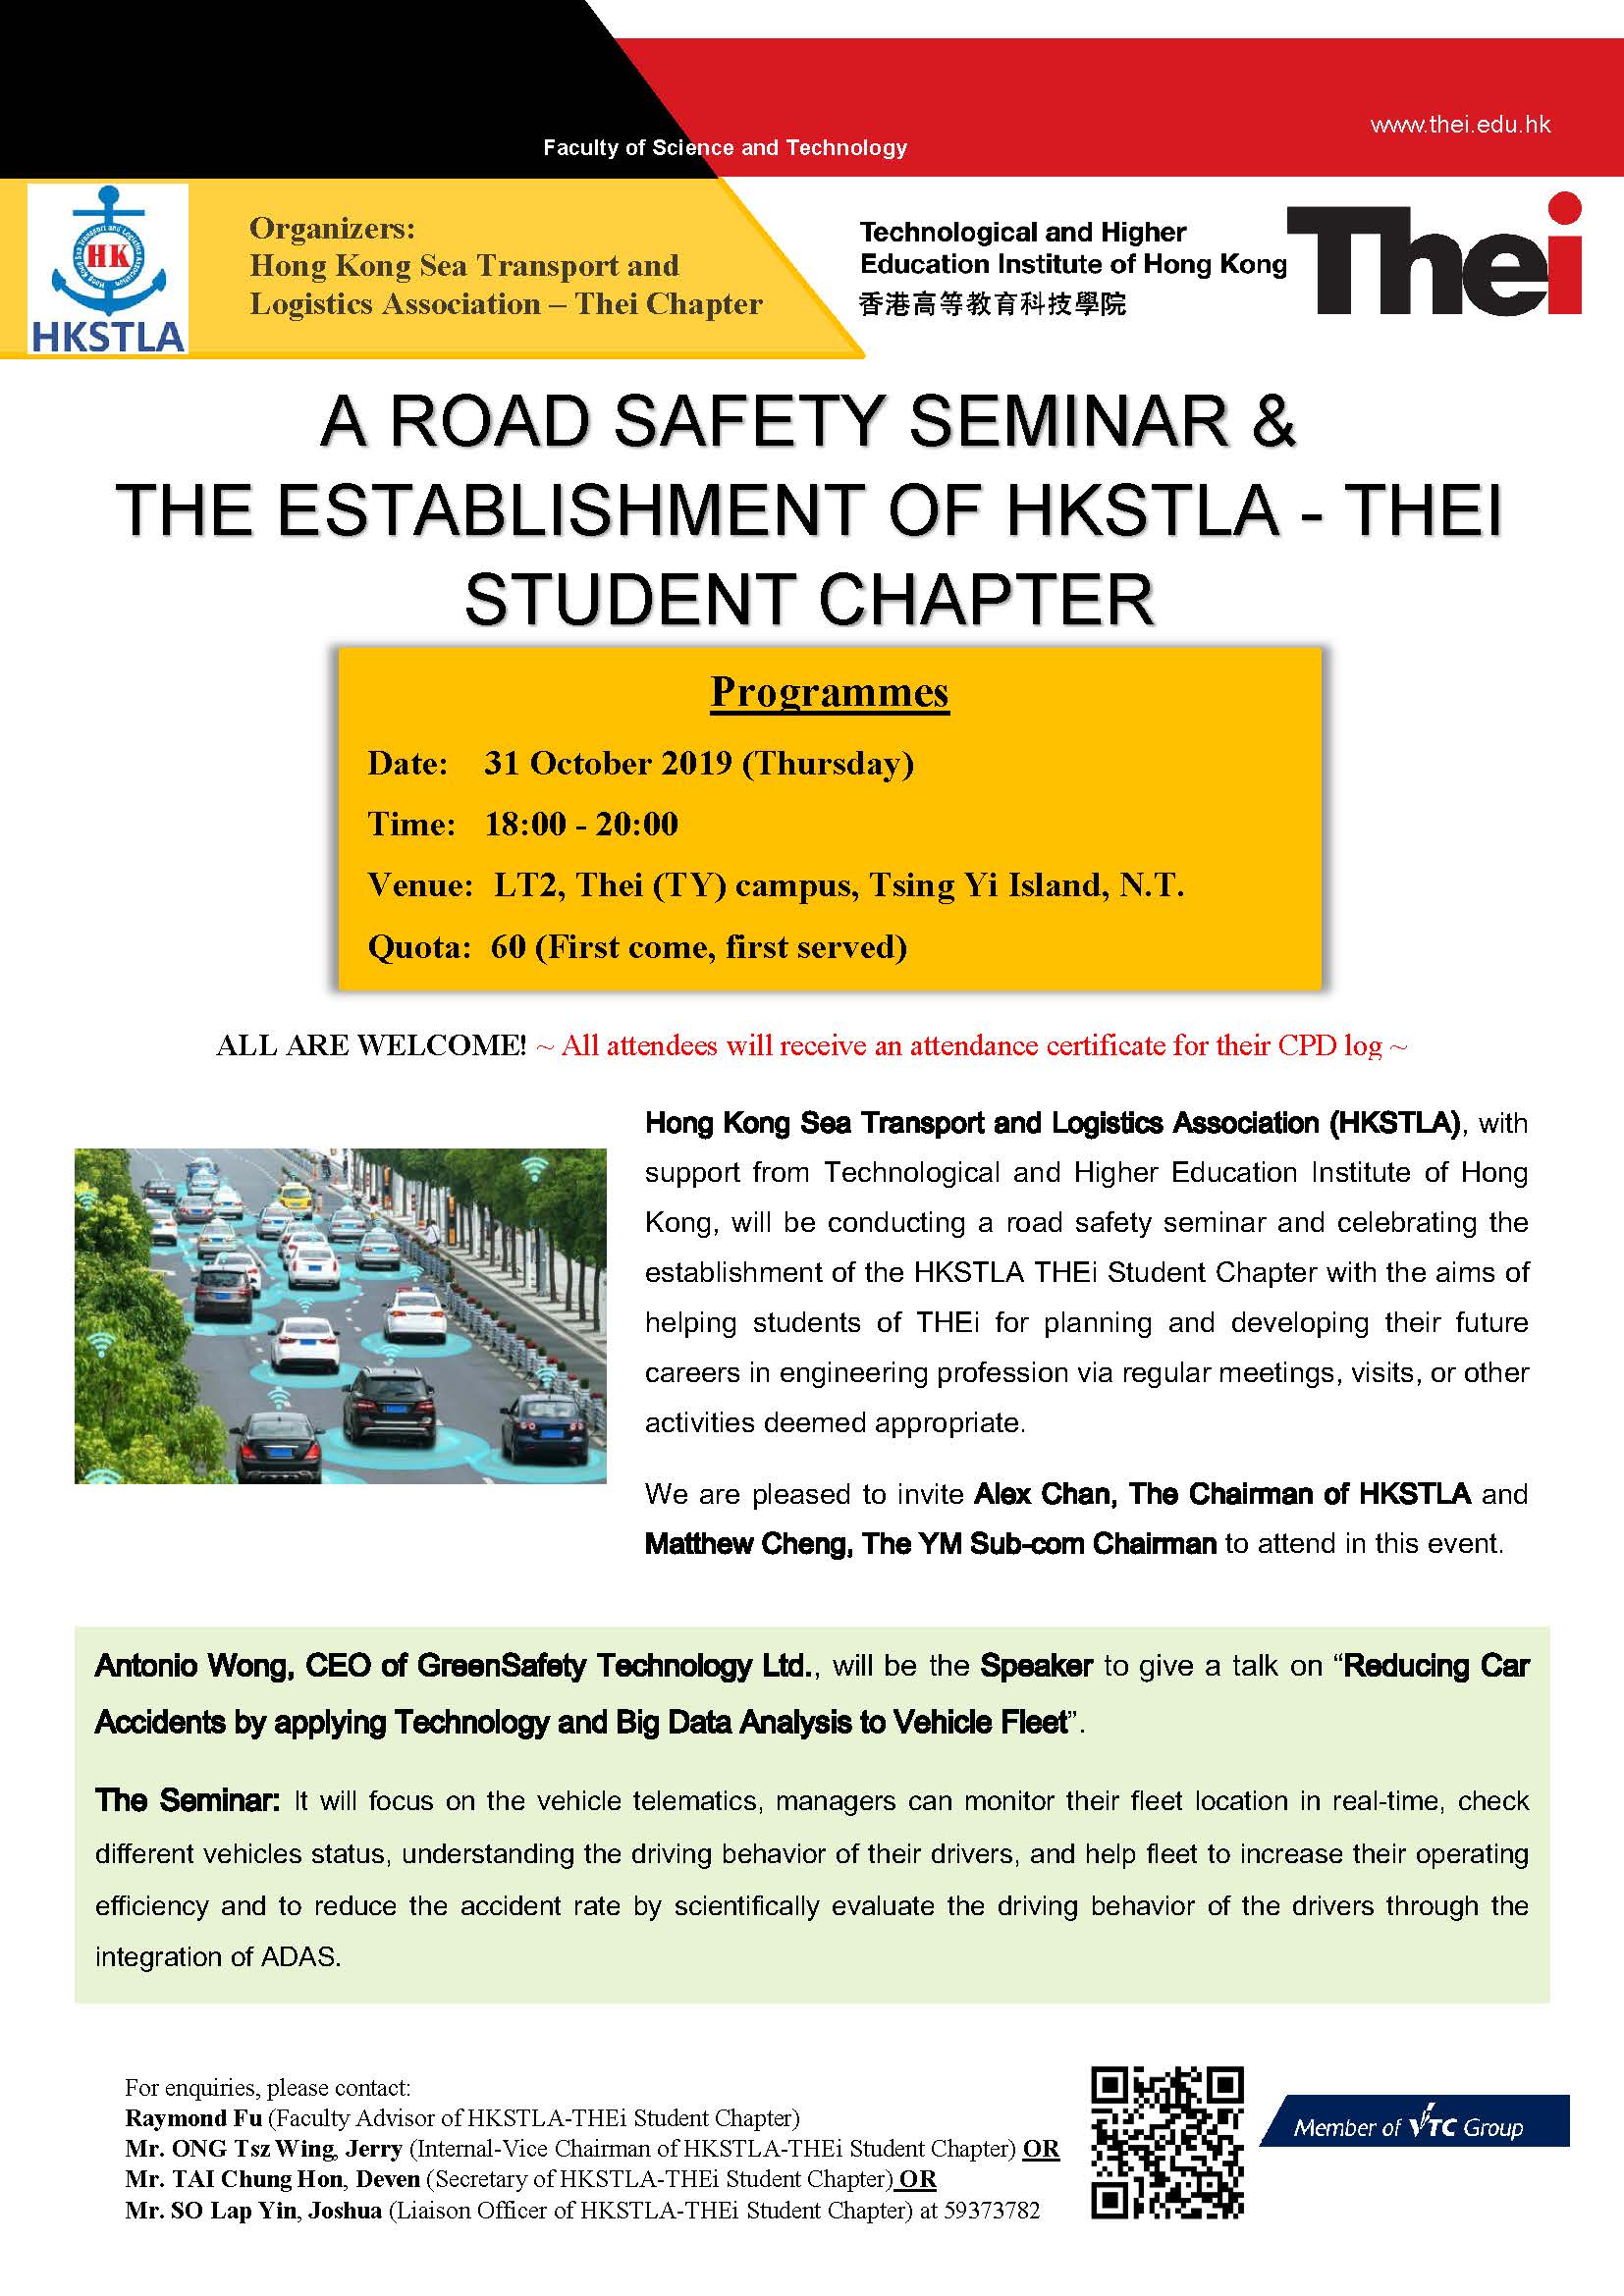 A ROAD SAFETY SEMINAR & THE ESTABLISHMENT OF HKSTLA - THEI STUDENT CHAPTER